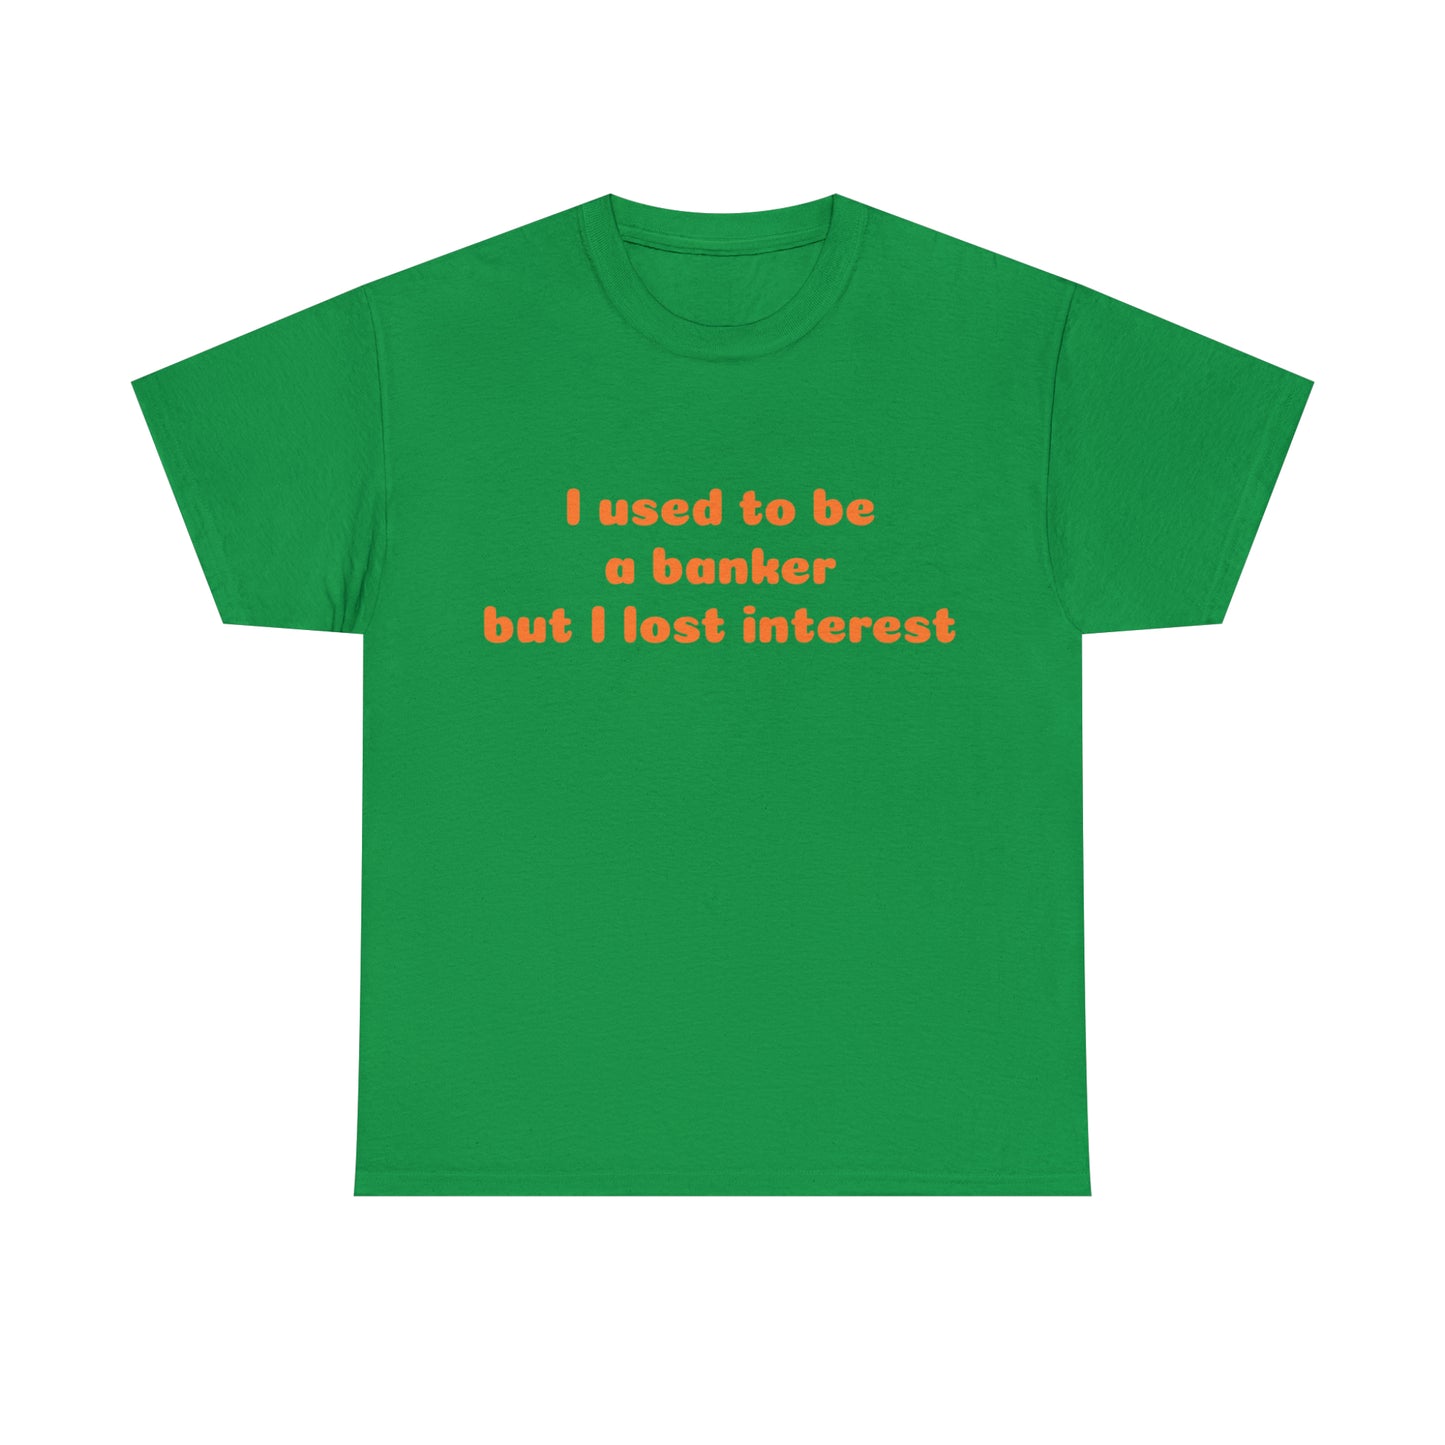 Custom Parody T-shirt, I used to be a banker but i lost interest shirt design